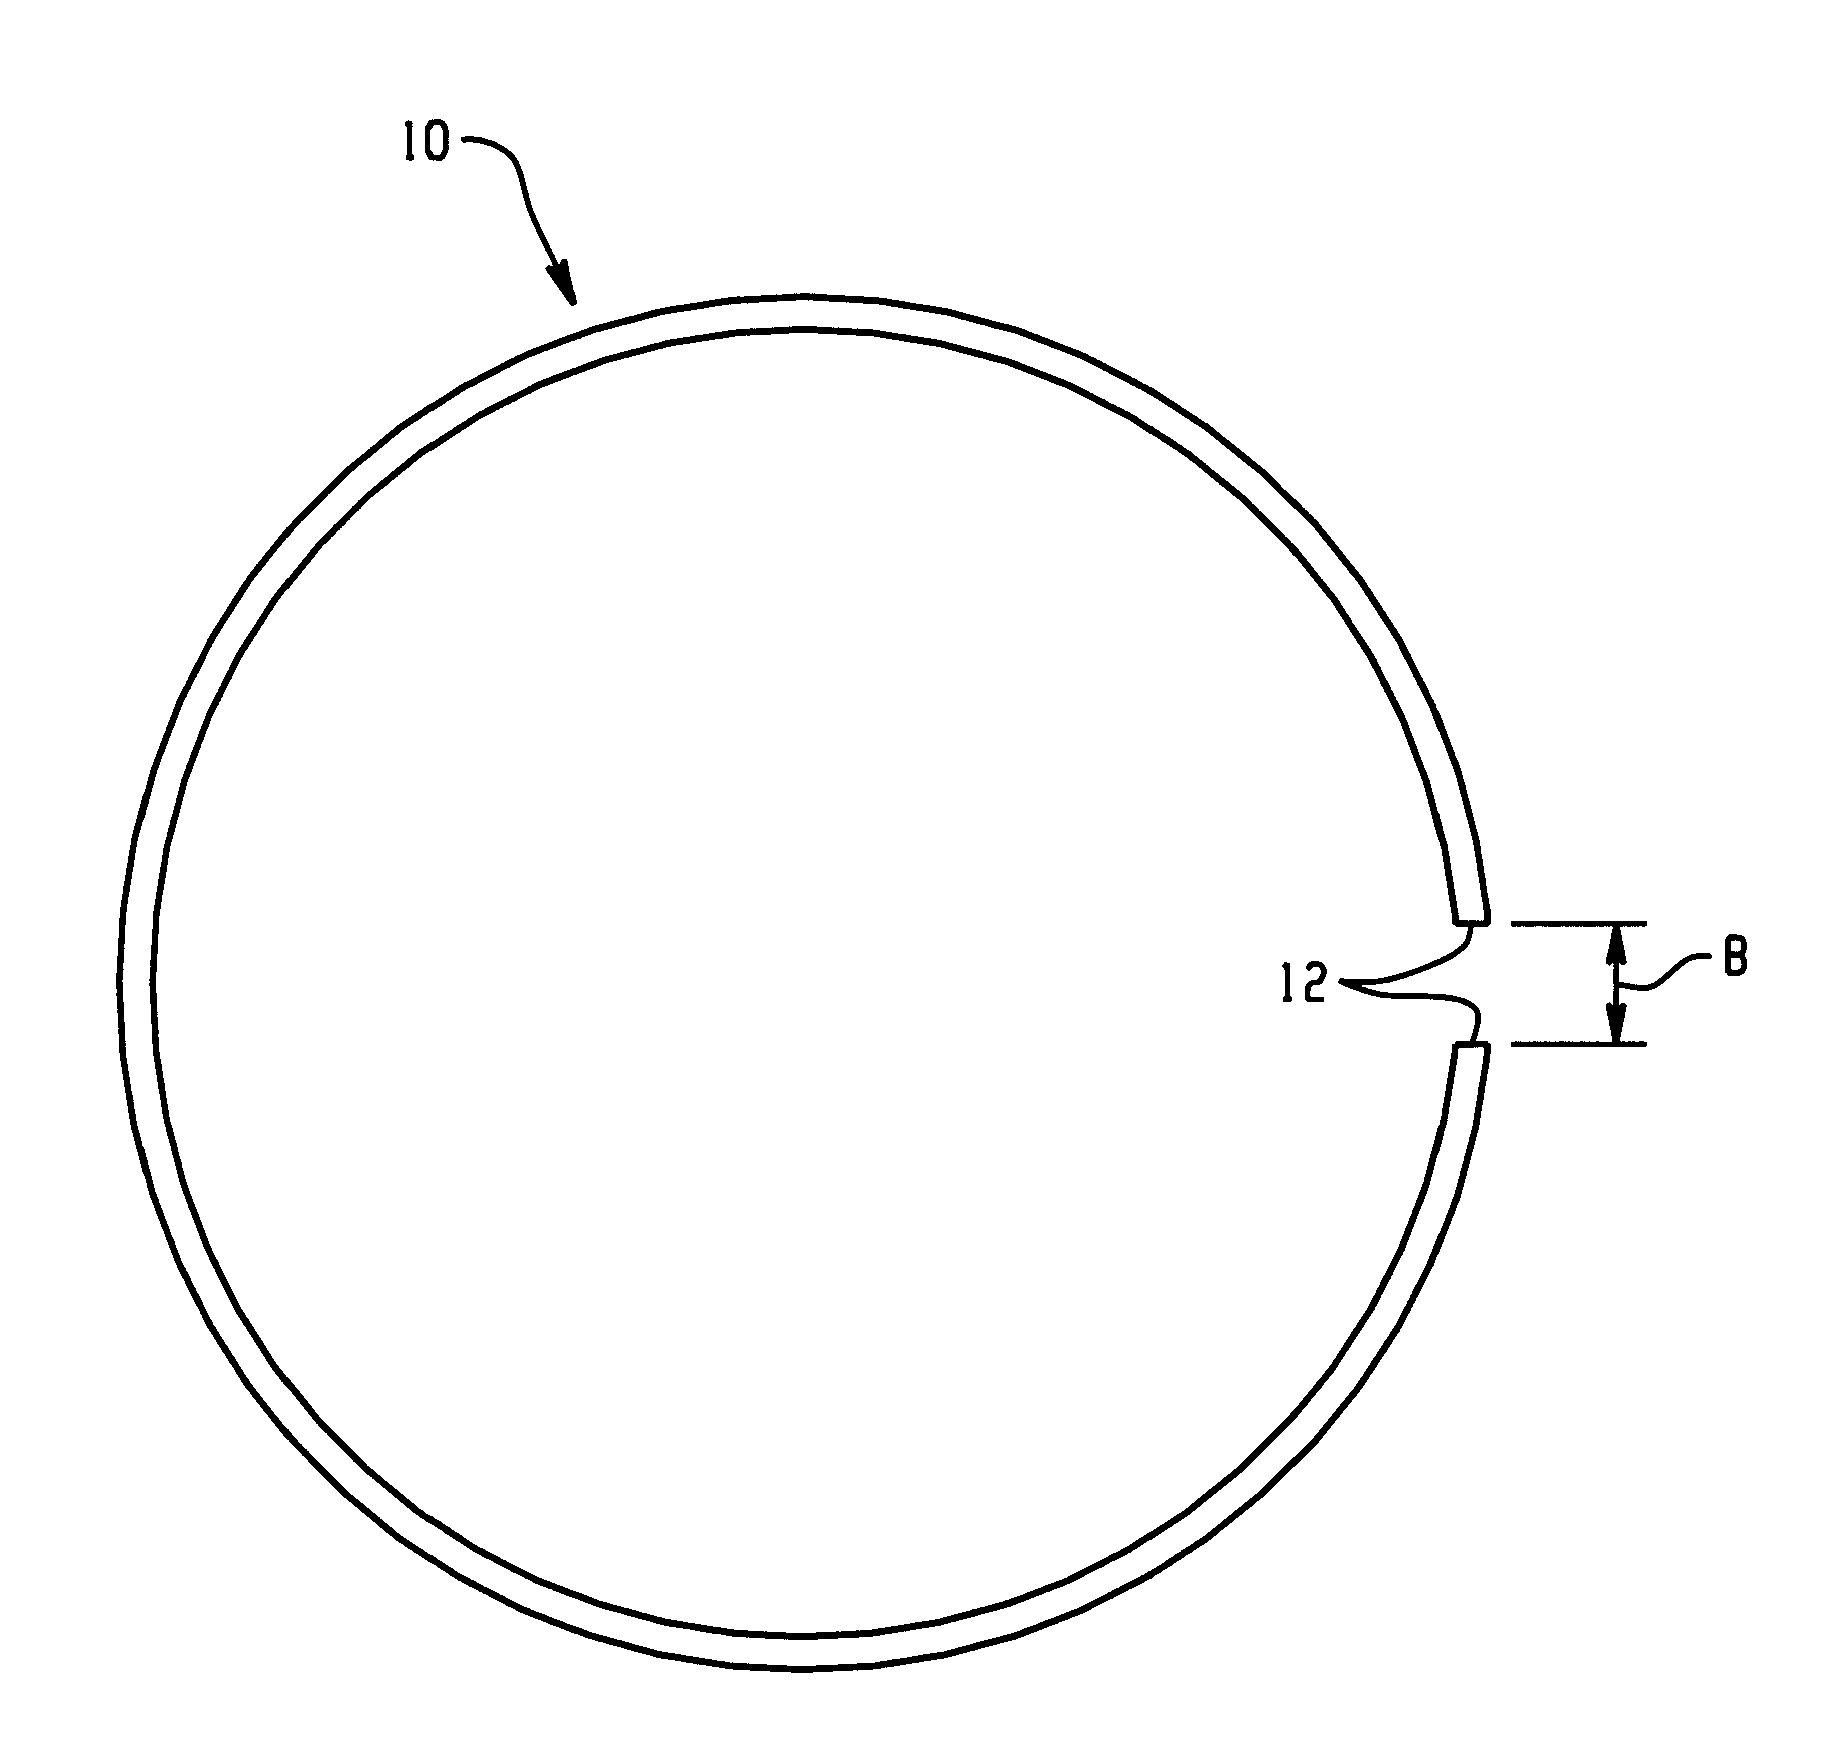 Piston ring assembly including a self accommodating smart piston ring